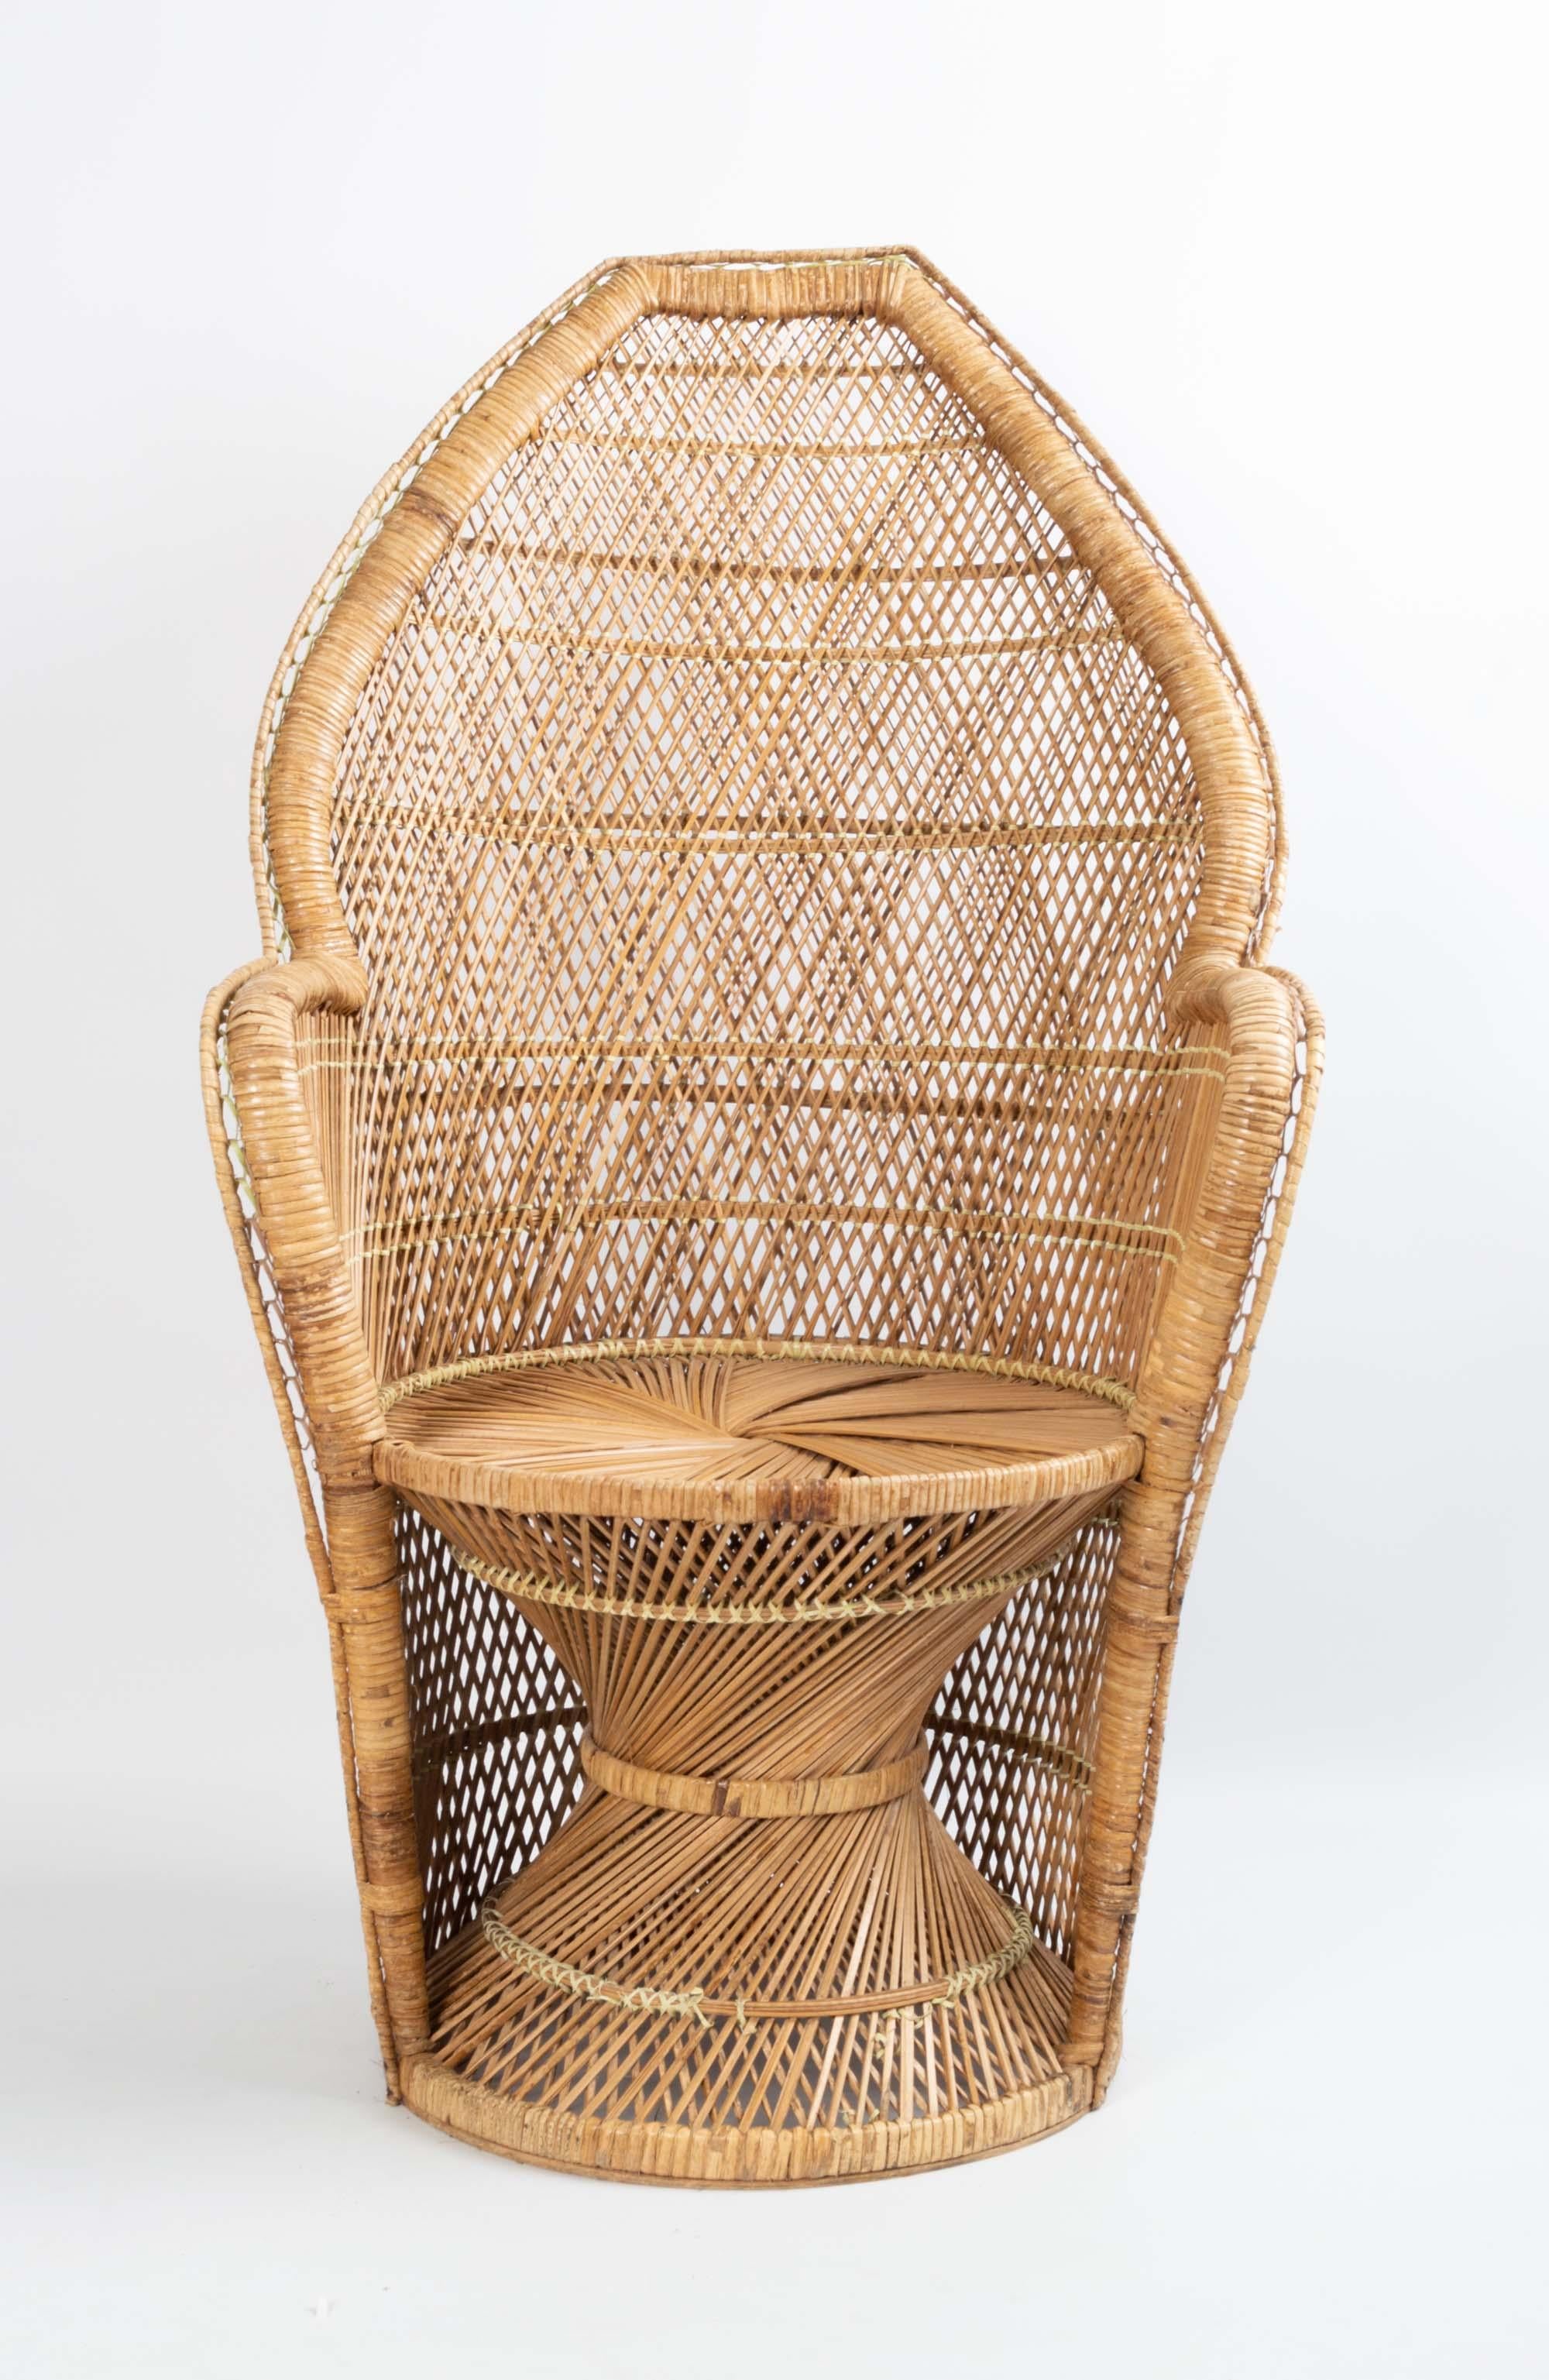 Mid century rattan wicker peacock chair France C.1960.

In a rare to find shape. Presented in excellent condition commensurate of age.